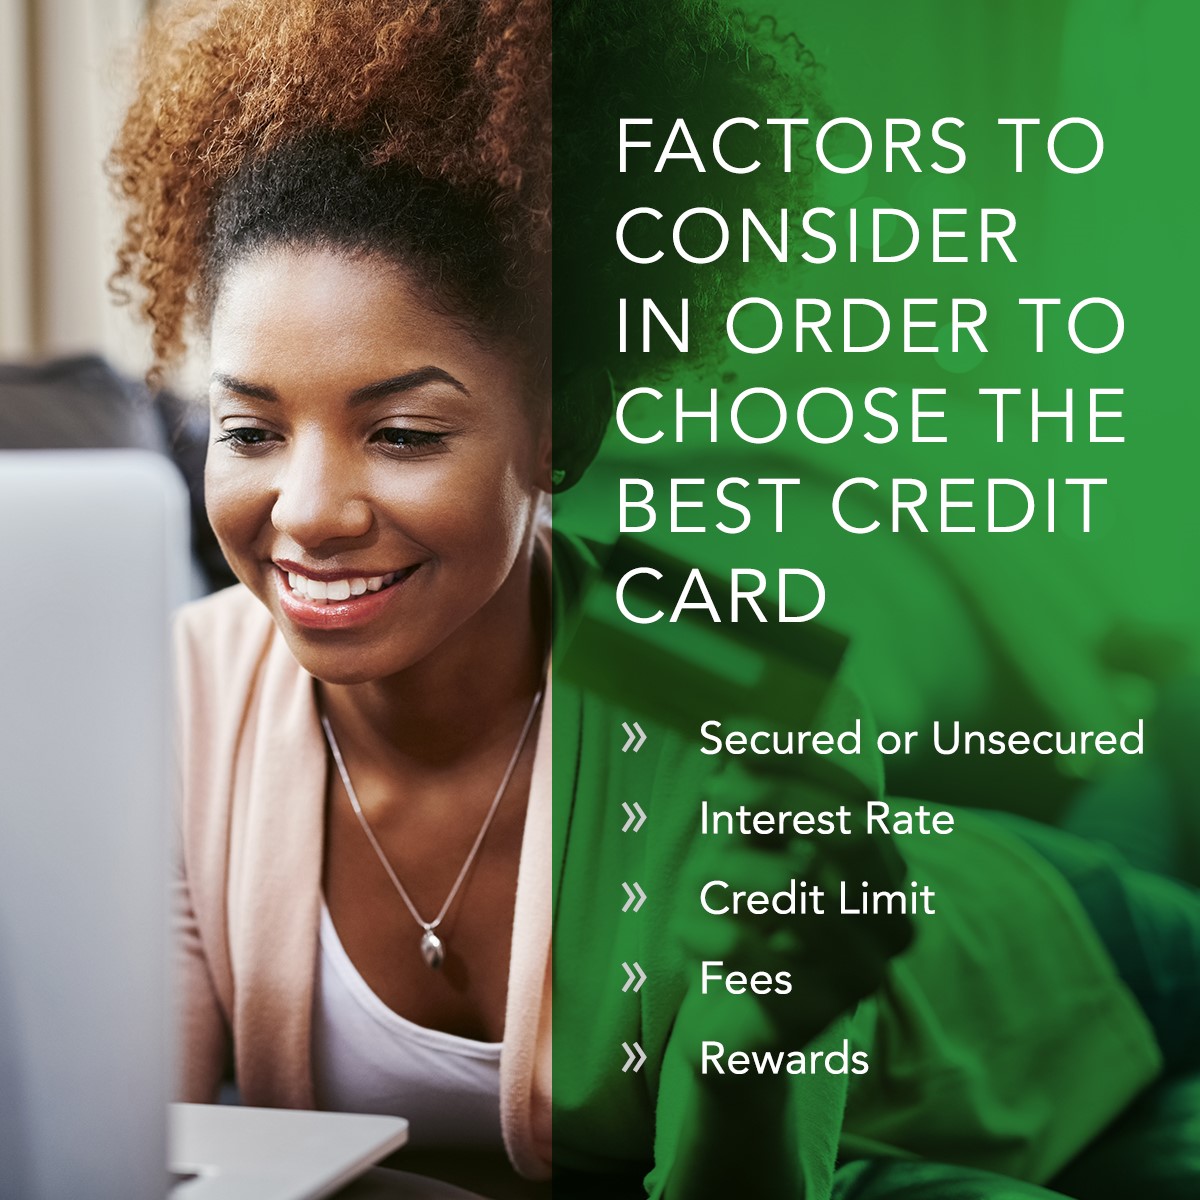 This image features a woman looking at a computer. It includes a list of factors Georgia residents can use to choose the best credit card.